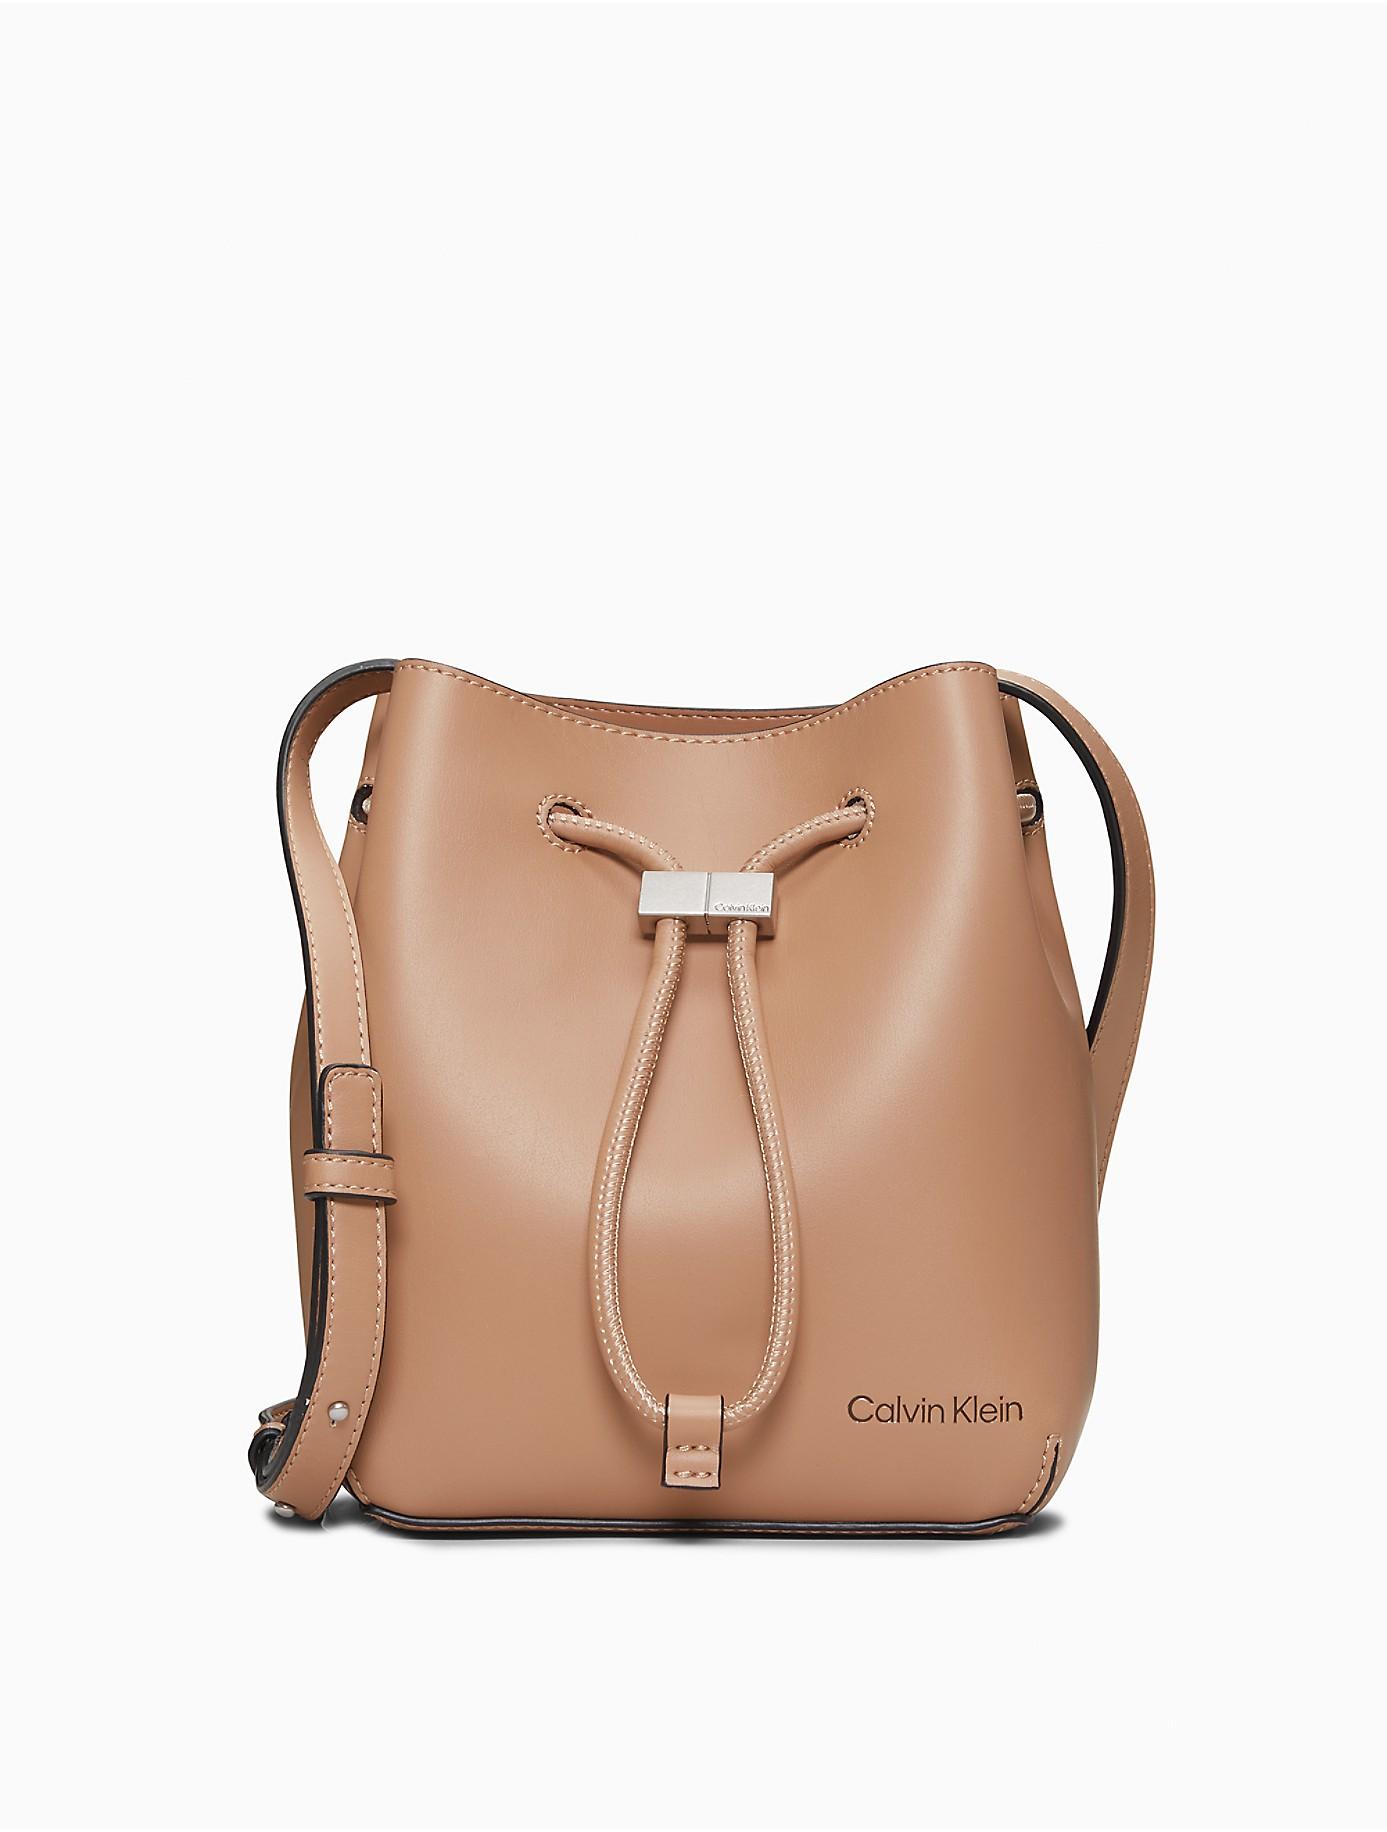 Calvin Klein Smooth Faux Leather Bucket Bag in Brown | Lyst